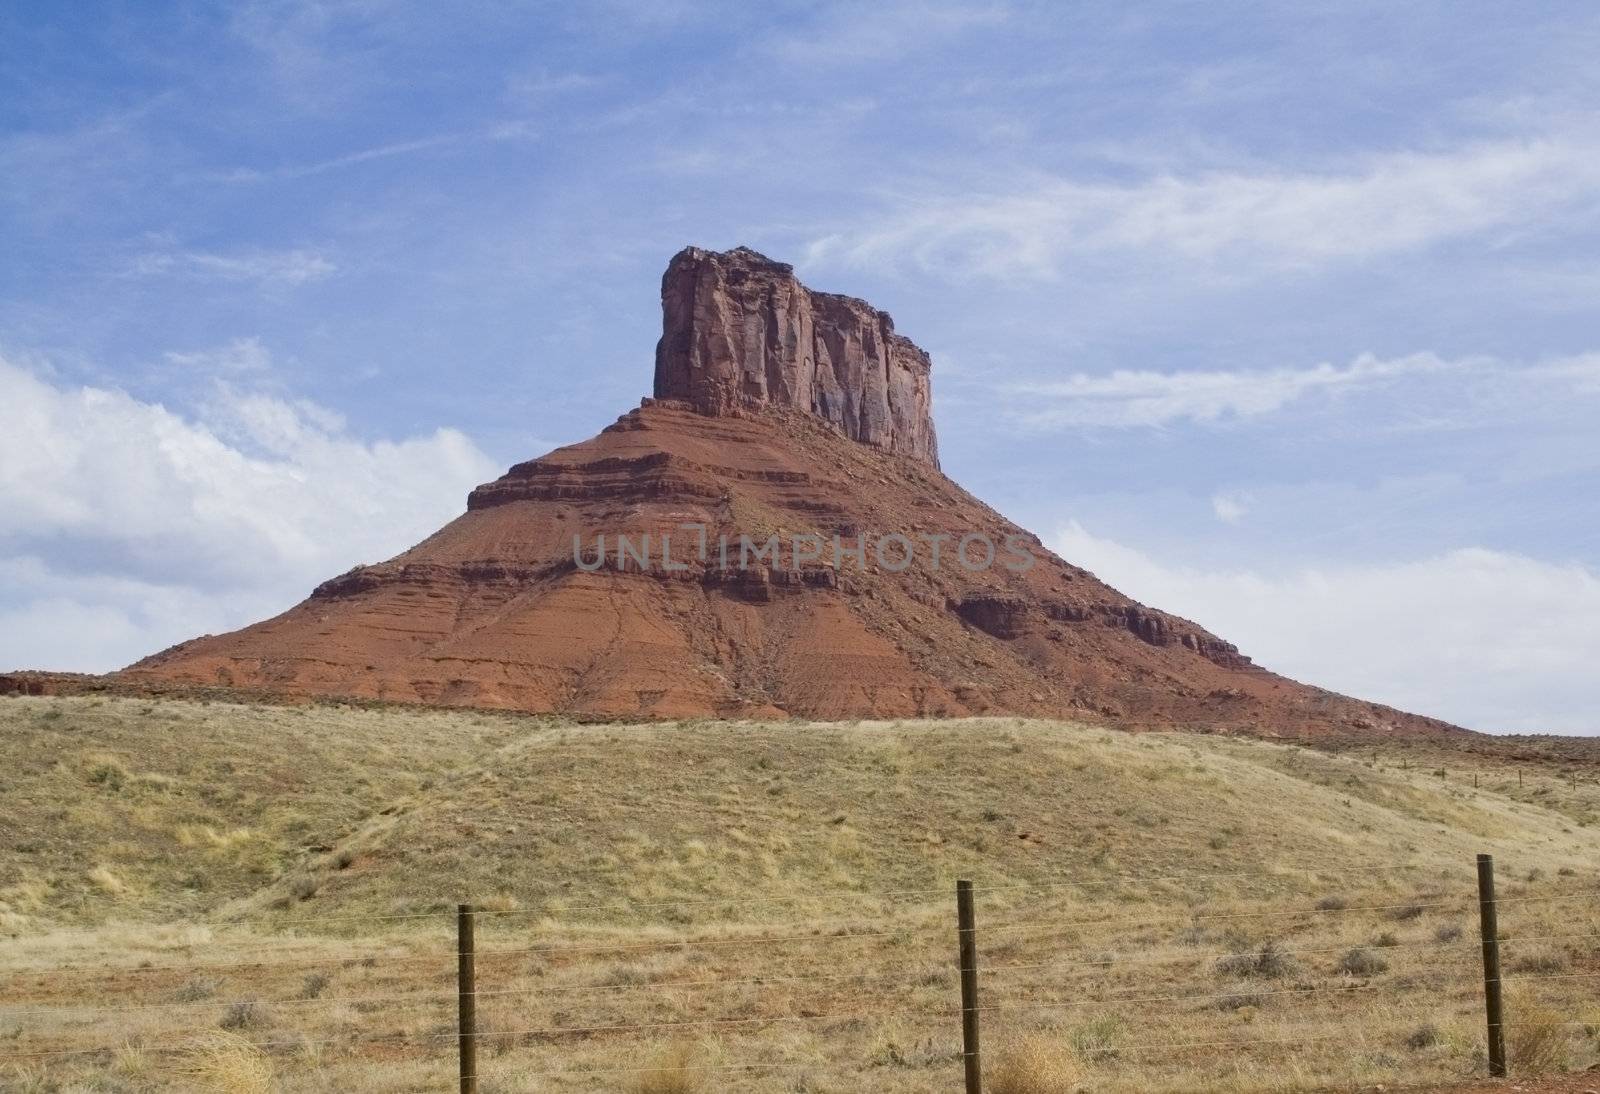 Moab area mountains and spires in Utah USA